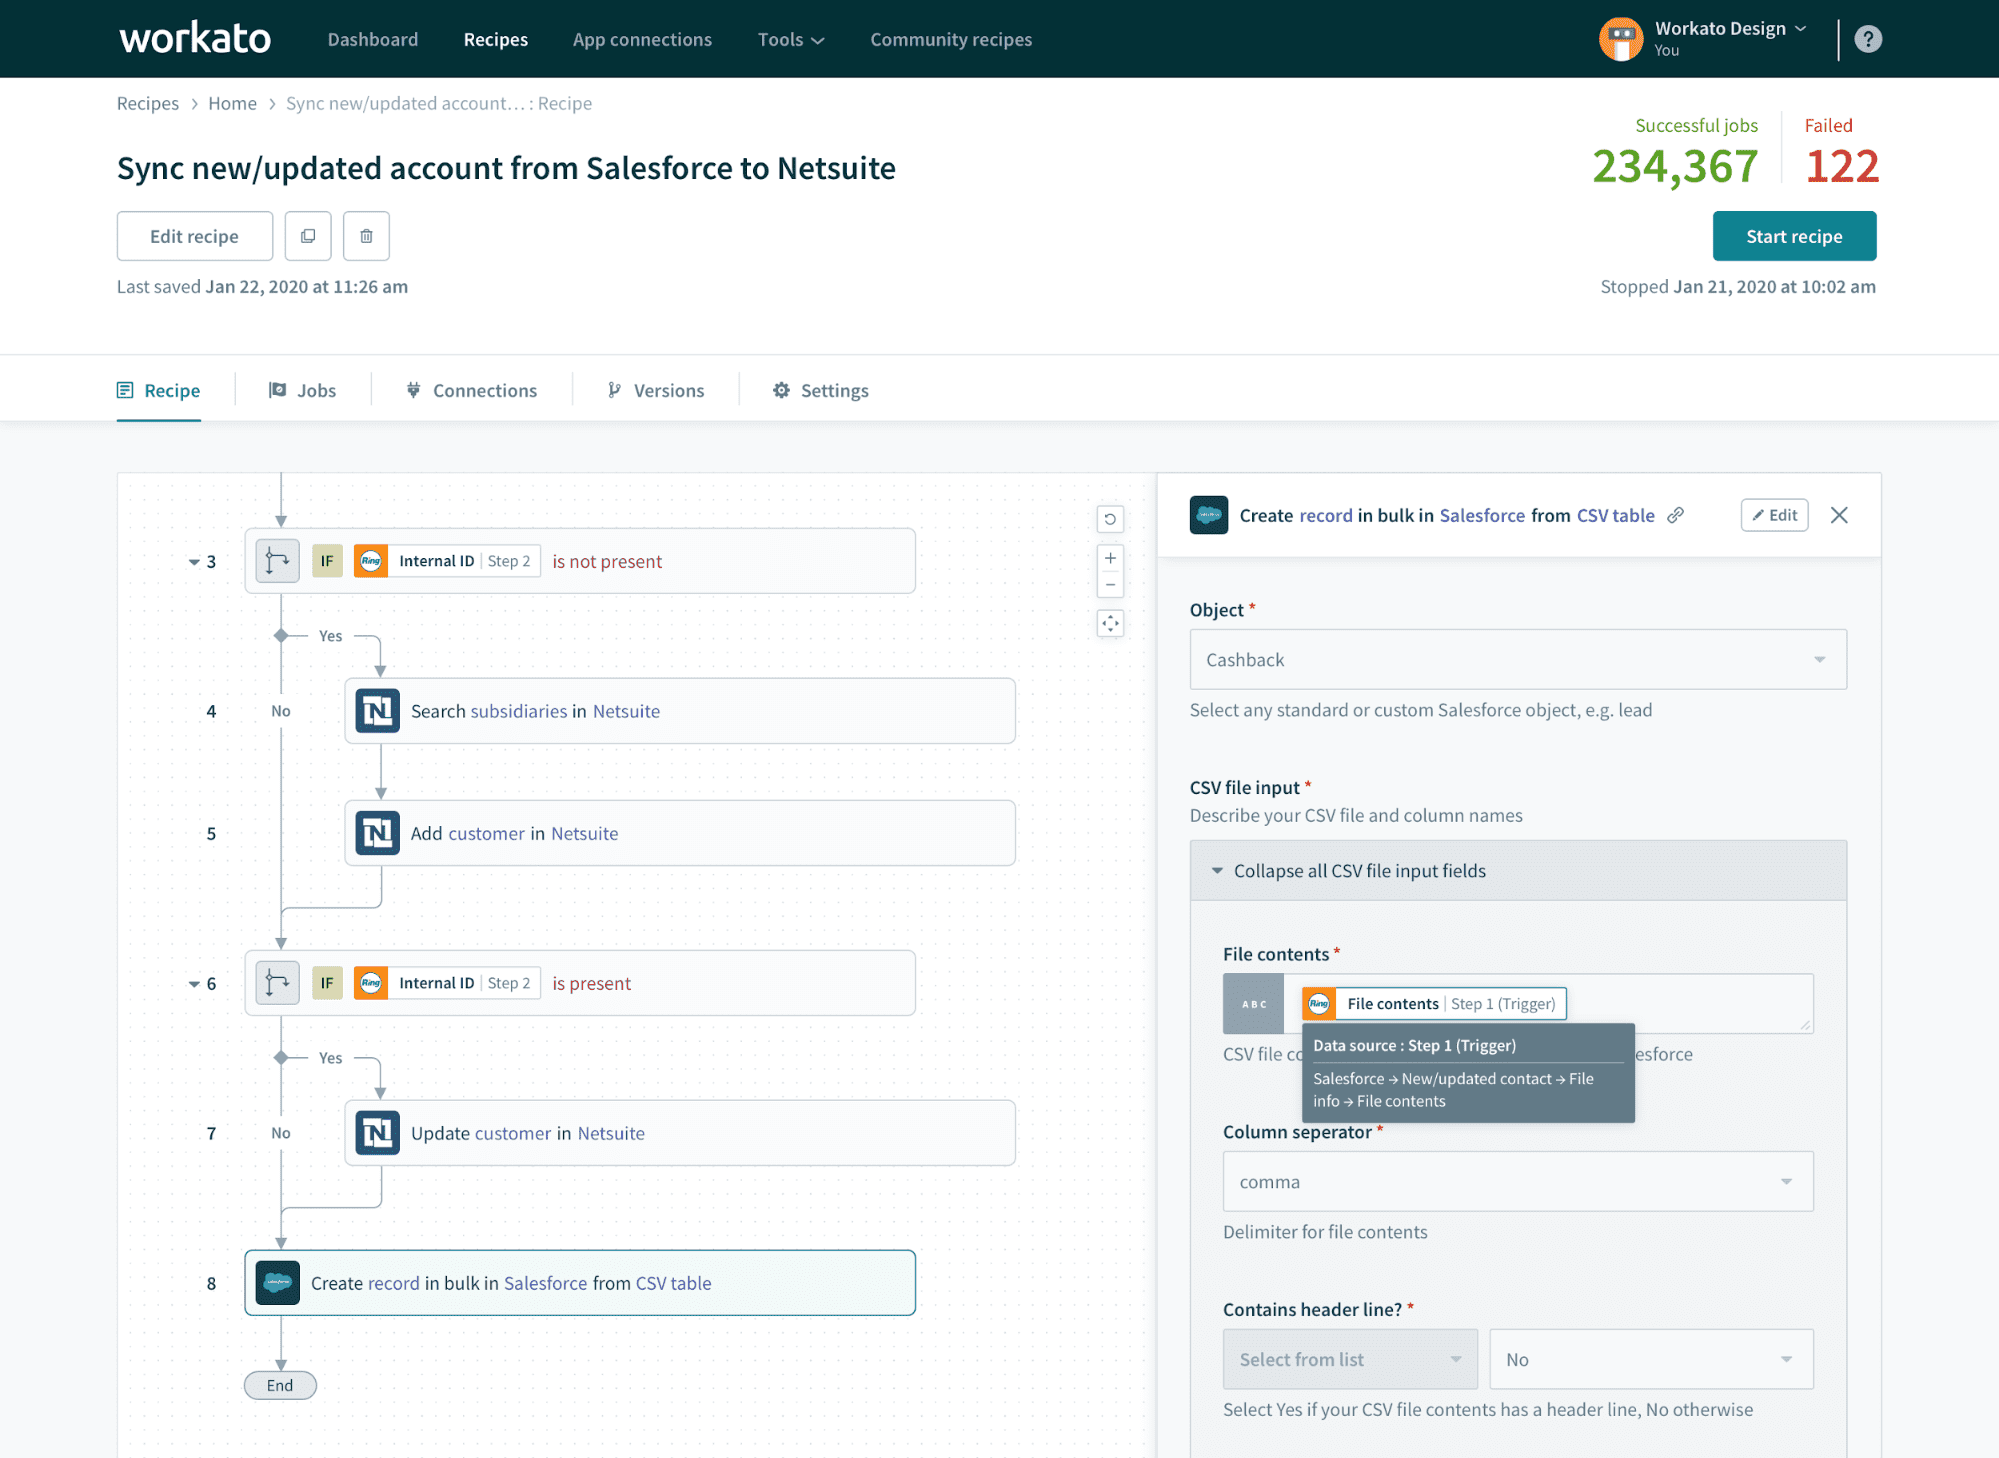 Hover to see datapill information